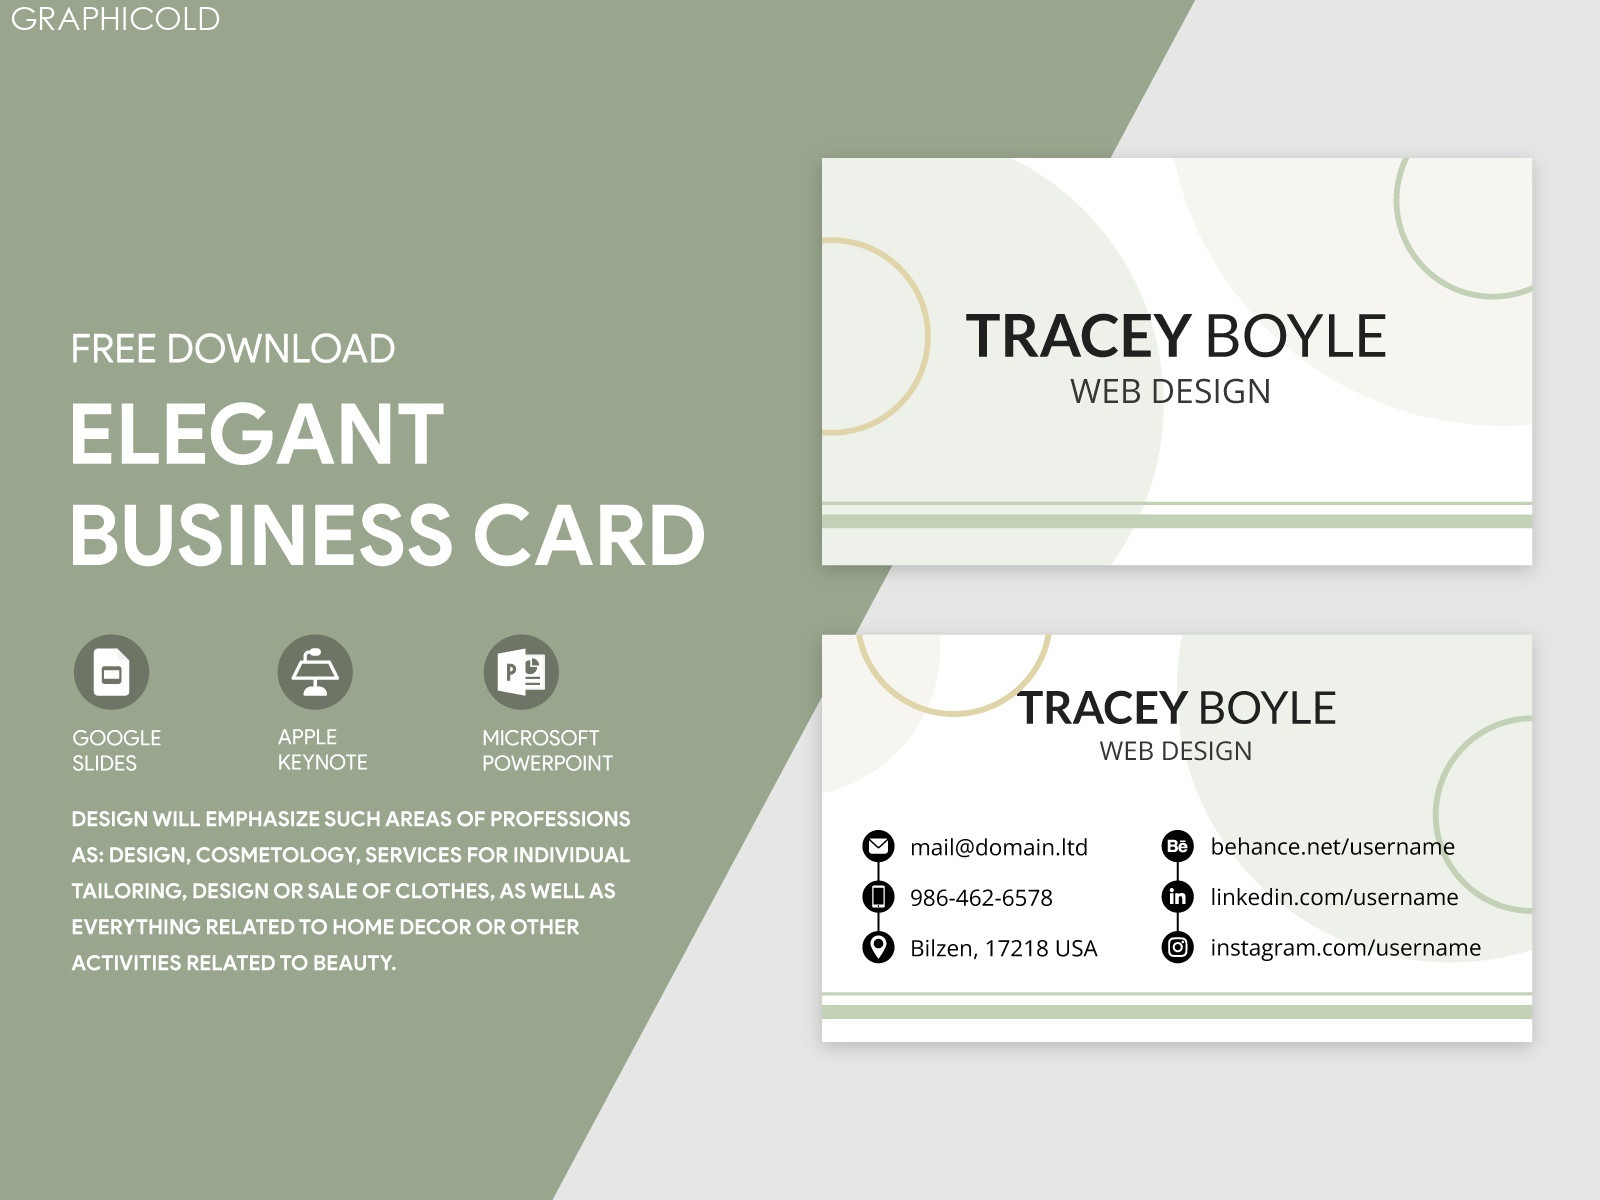 Professional Business Card Template For Google Docs GRAPHICOLD